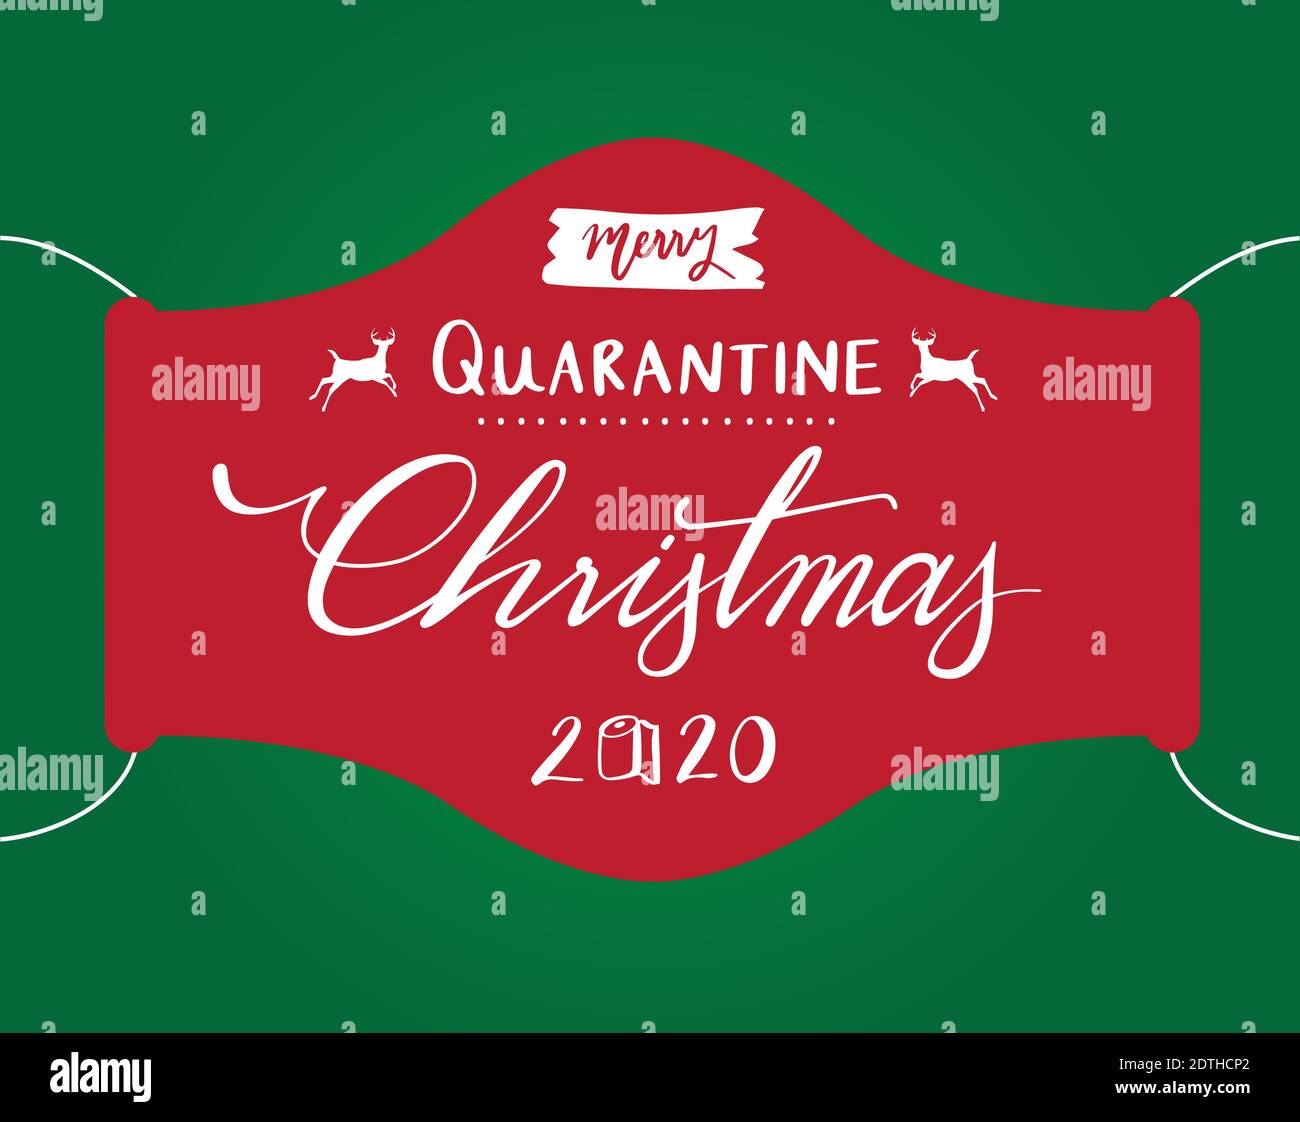 Merry quarantine Christmas 2020 text on red mask background Stock Vector